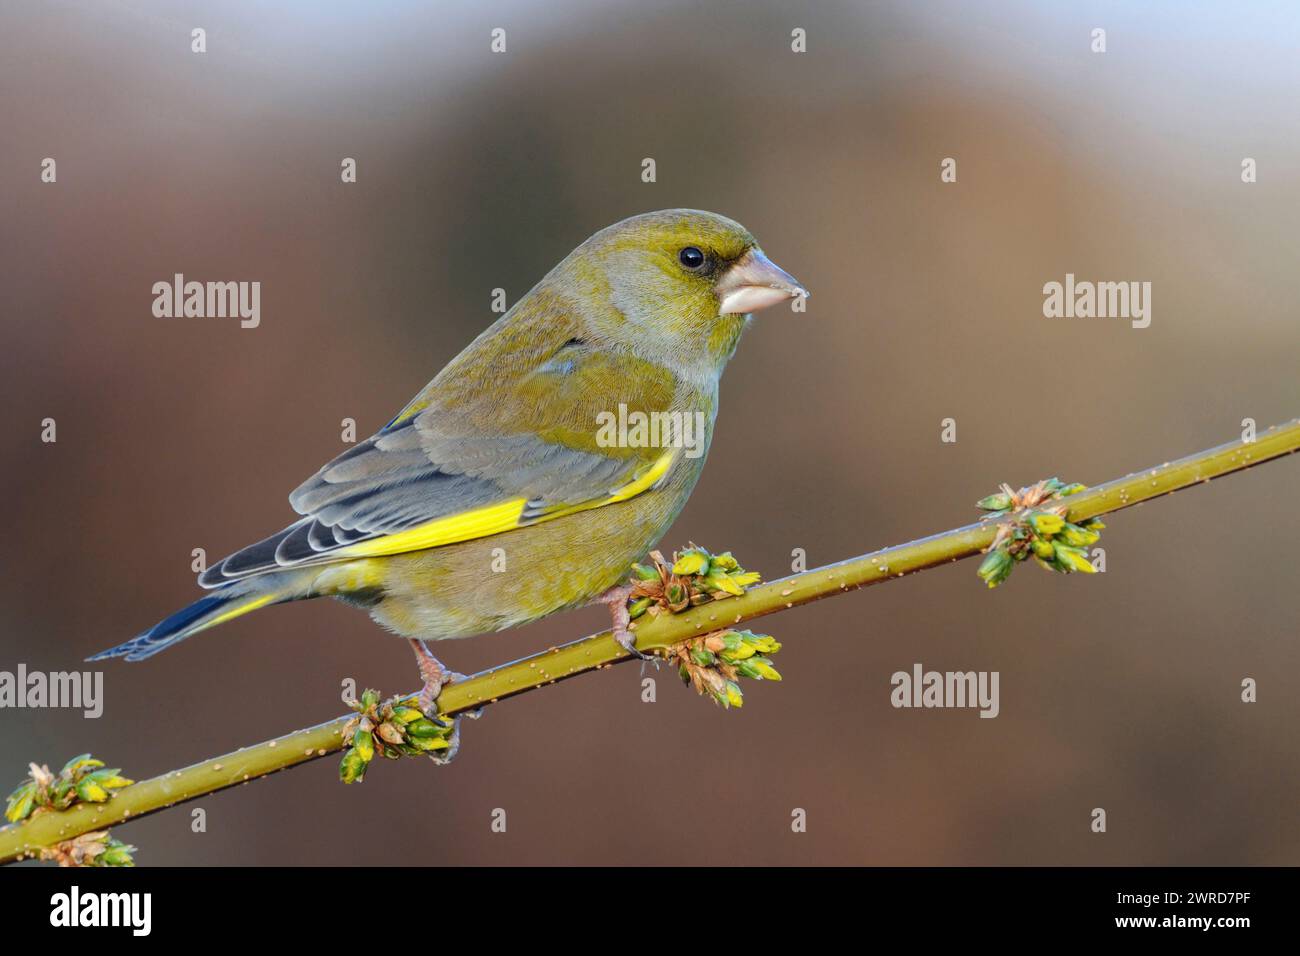 European Greenfinch ( Carduelis chloris ) perched on a branch with yellow blossoms, forsythia branch in spring, typical garden bird native songbird, r Stock Photo